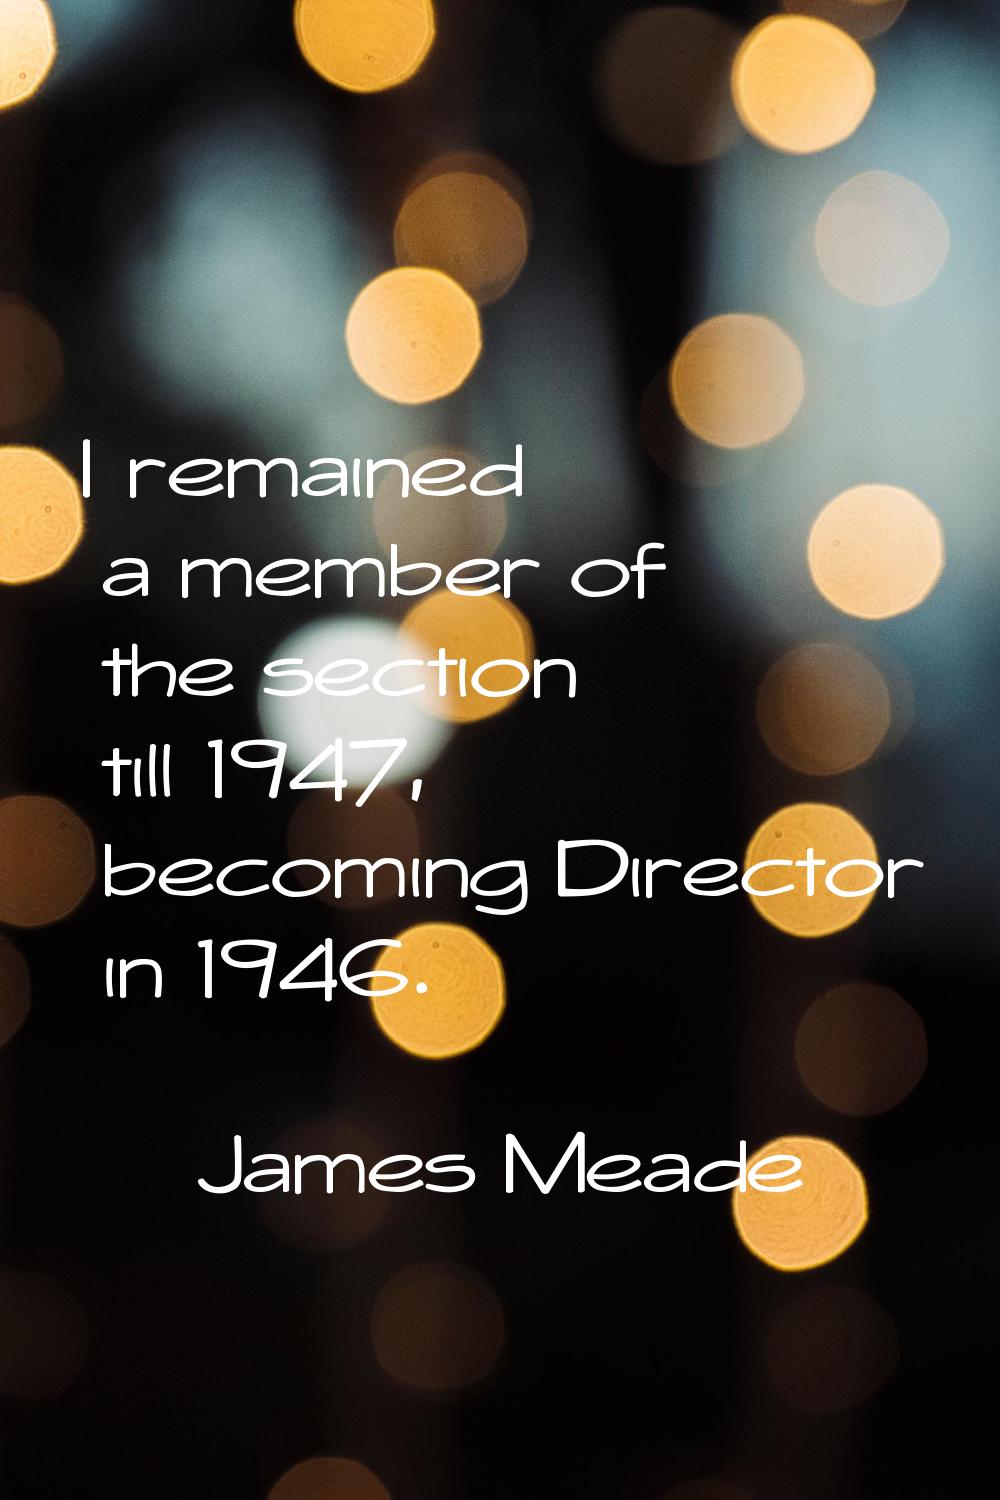 I remained a member of the section till 1947, becoming Director in 1946.